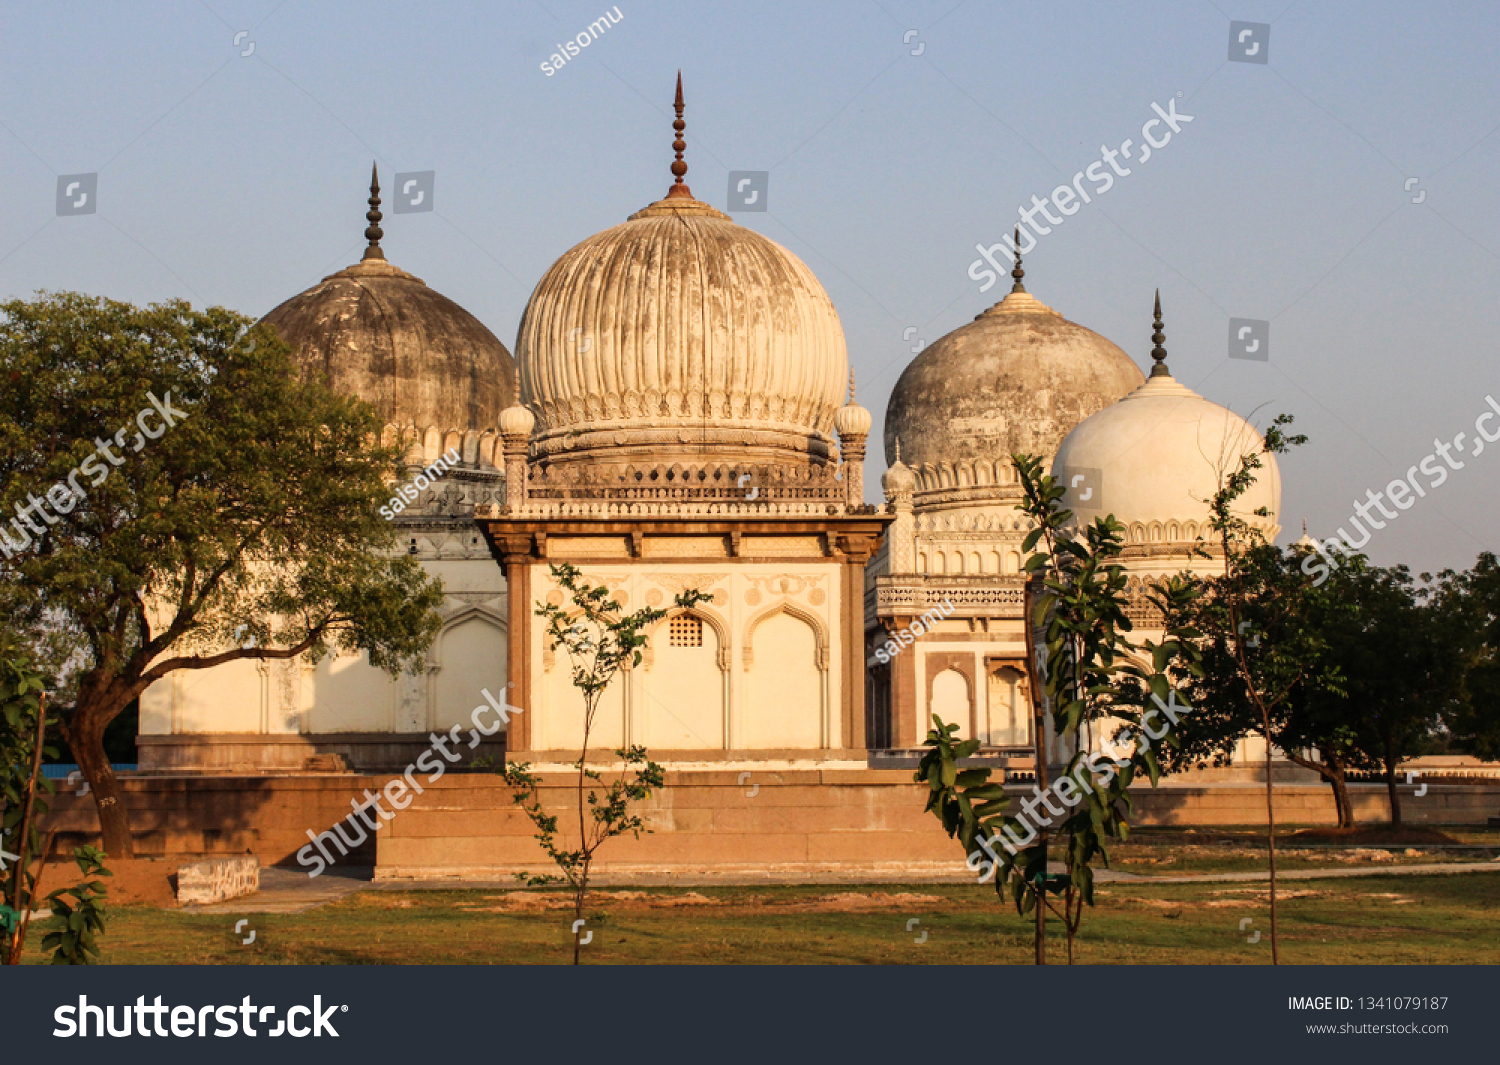 The Qutb Shahi Tombs are located in Hyderabad, India. 
The tombs form a large cluster and stand on a raised platform. The tombs are domed structures built on a square base surrounded by pointed arches #1341079187